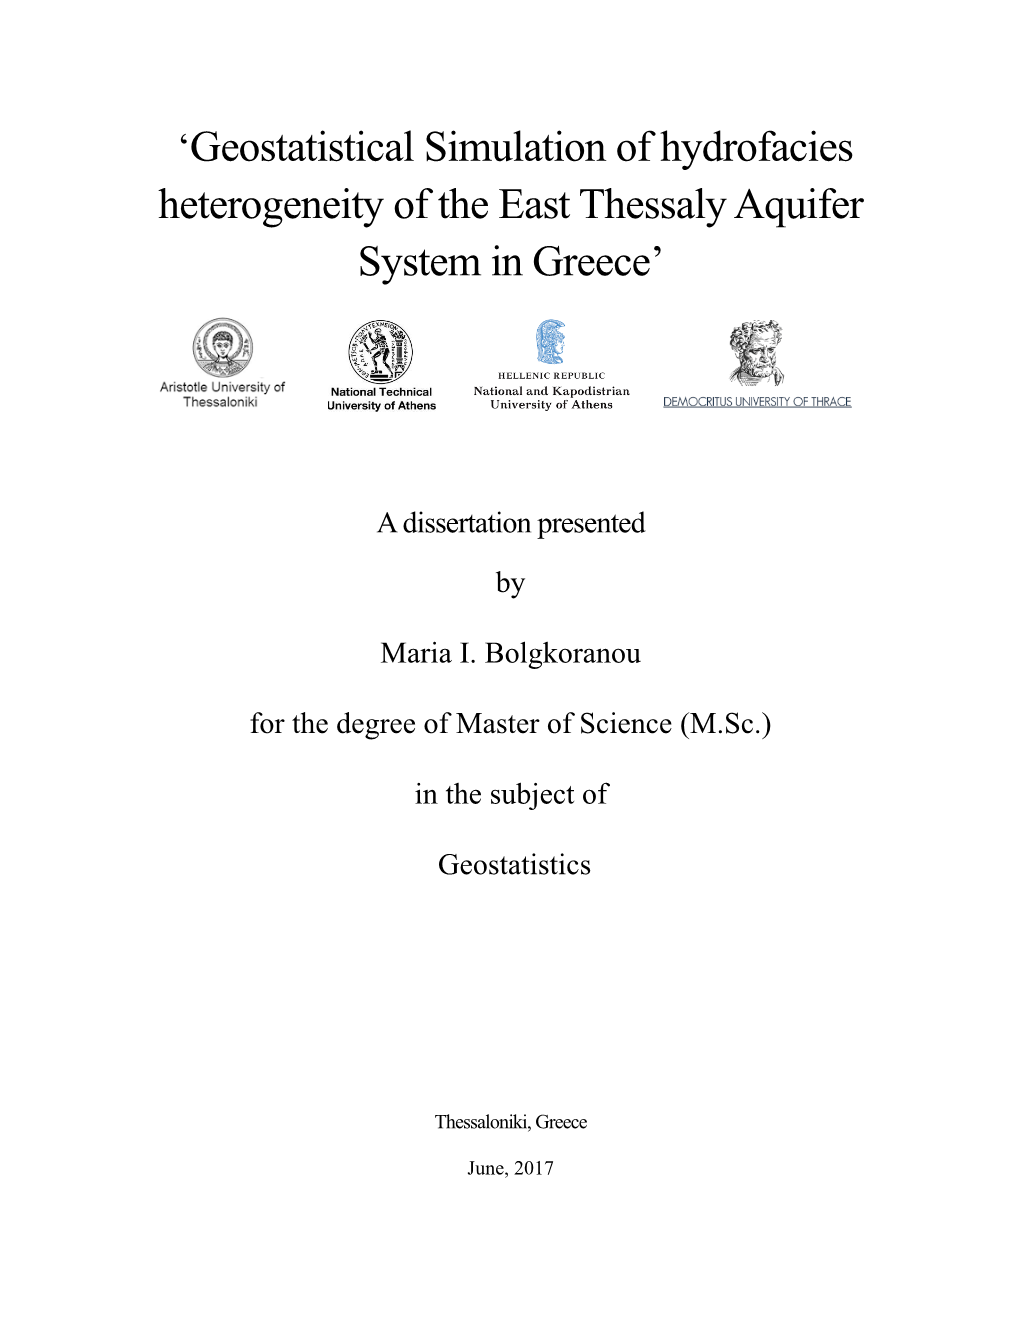 Heterogeneity of the East Thessaly Aquifer System in Greece’